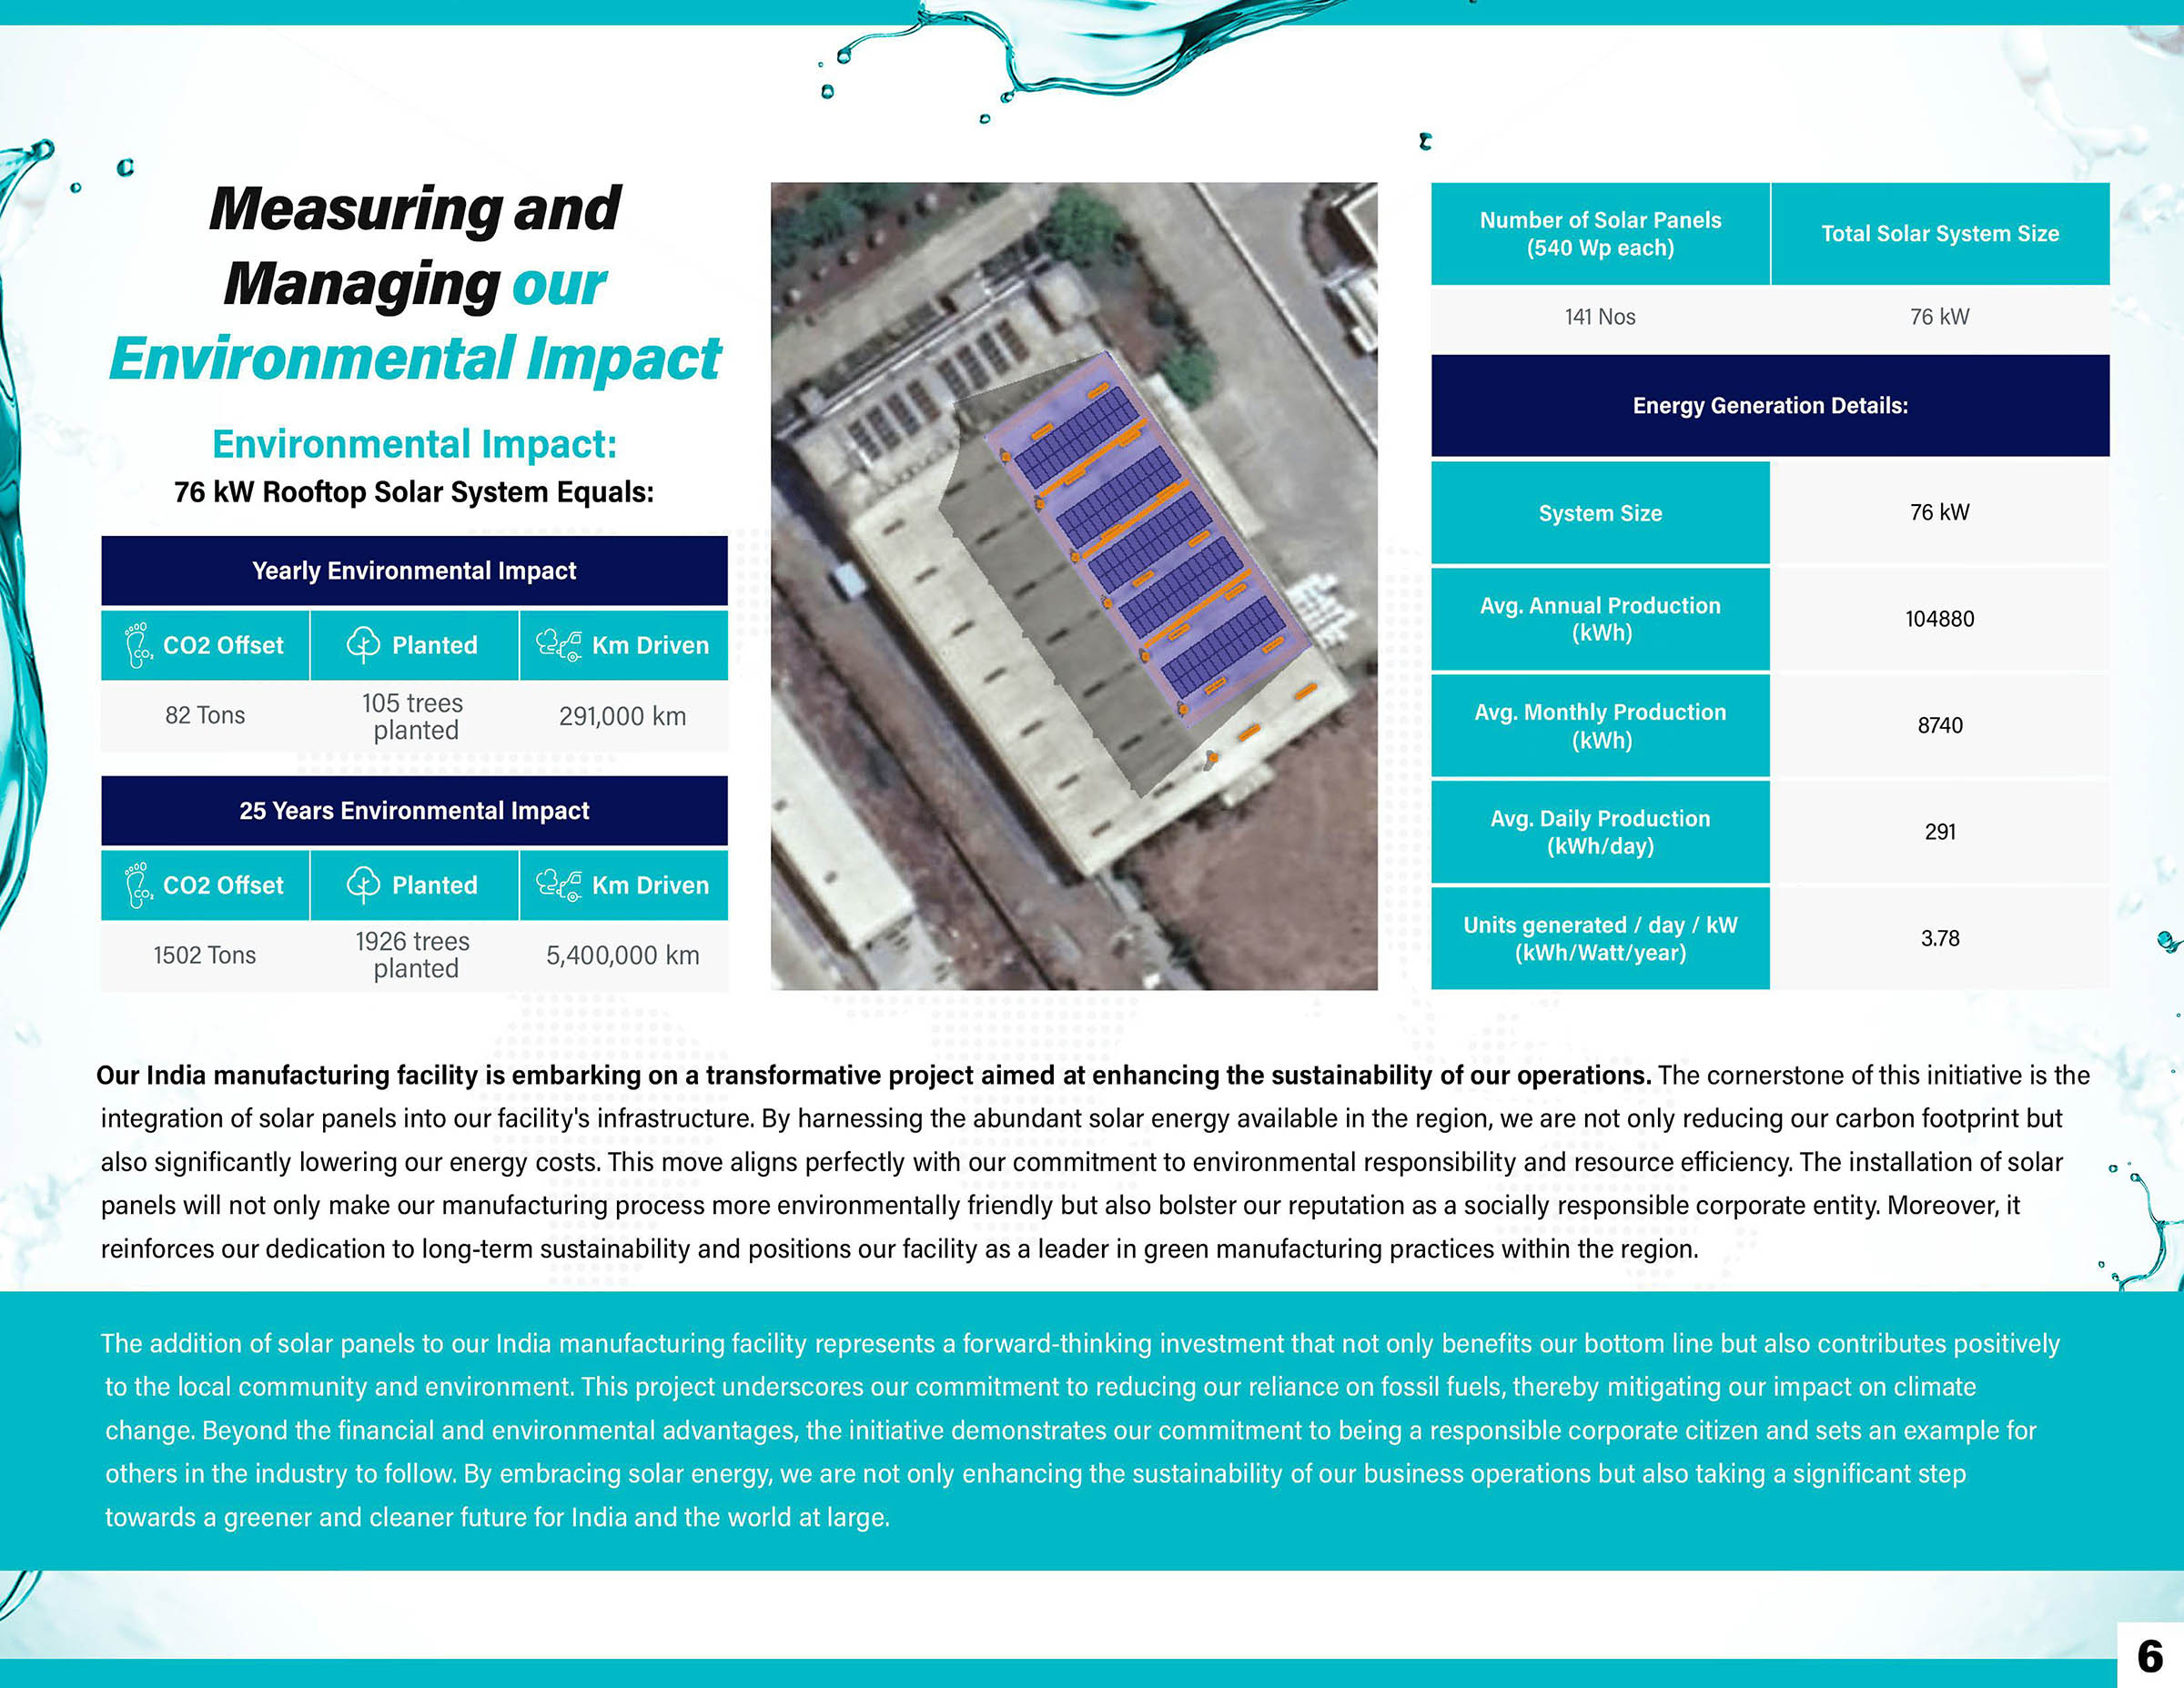 Sustainability Report - Measuring and Managing our Environmental Impact